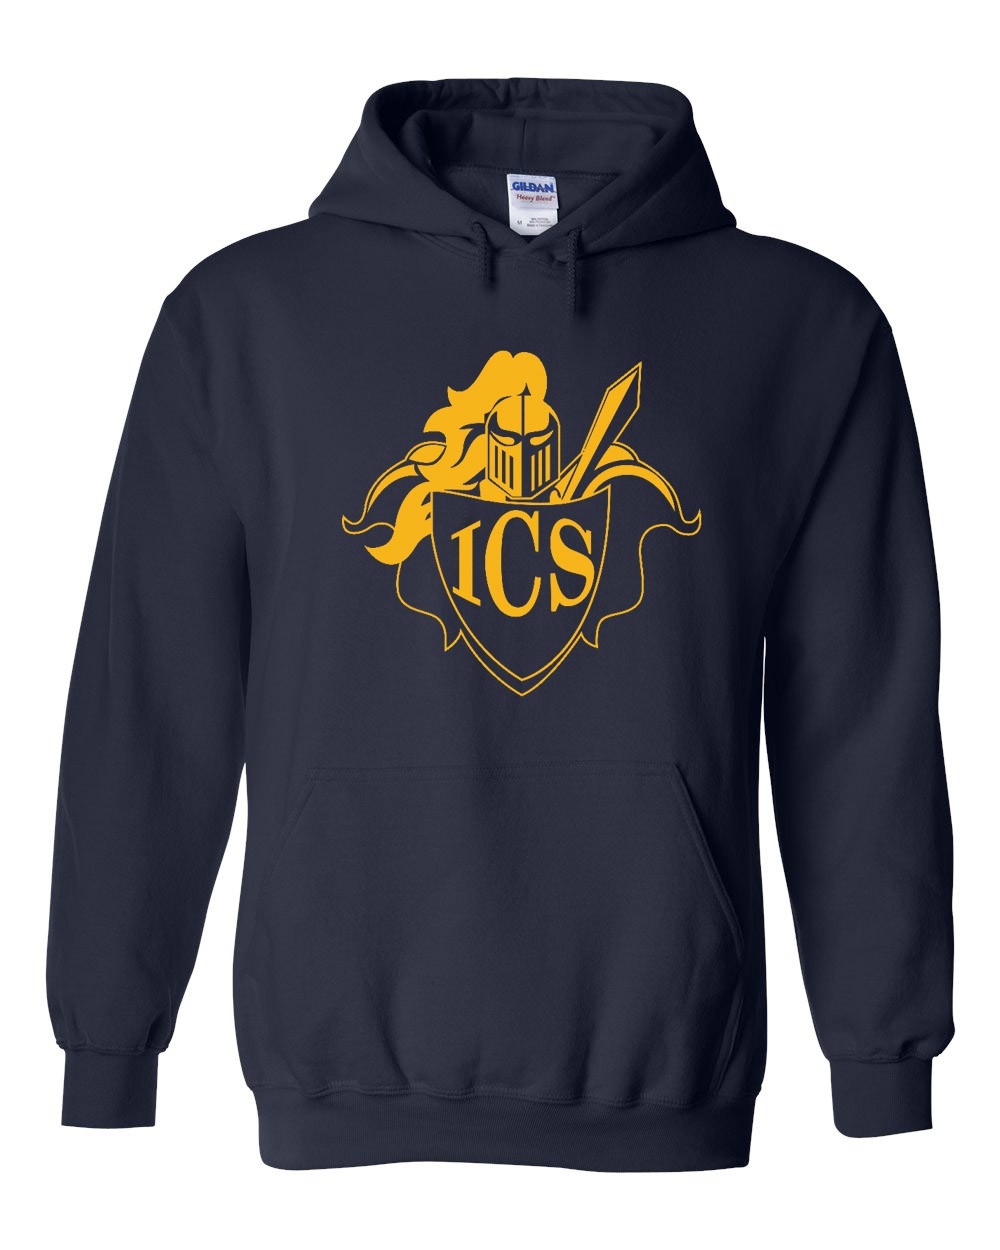 ICS Staff Pullover Hoodie w/ Gold Logo - Please allow 2-3 Weeks for Delivery